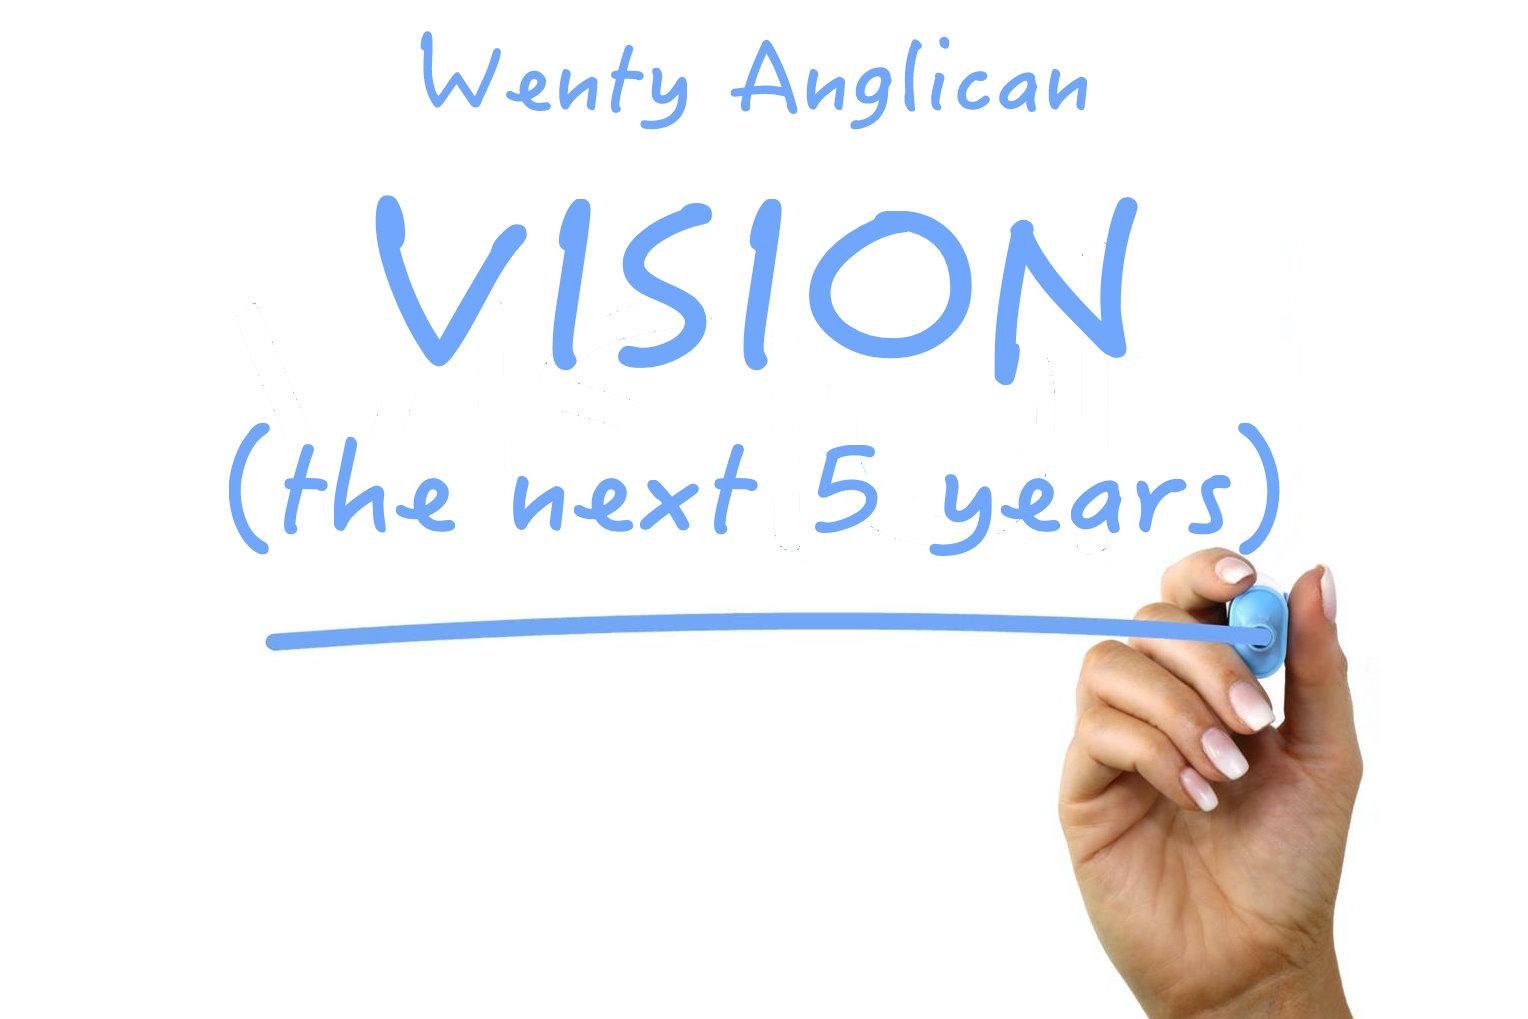 Wenty Anglican Vision. (The next 5 years).